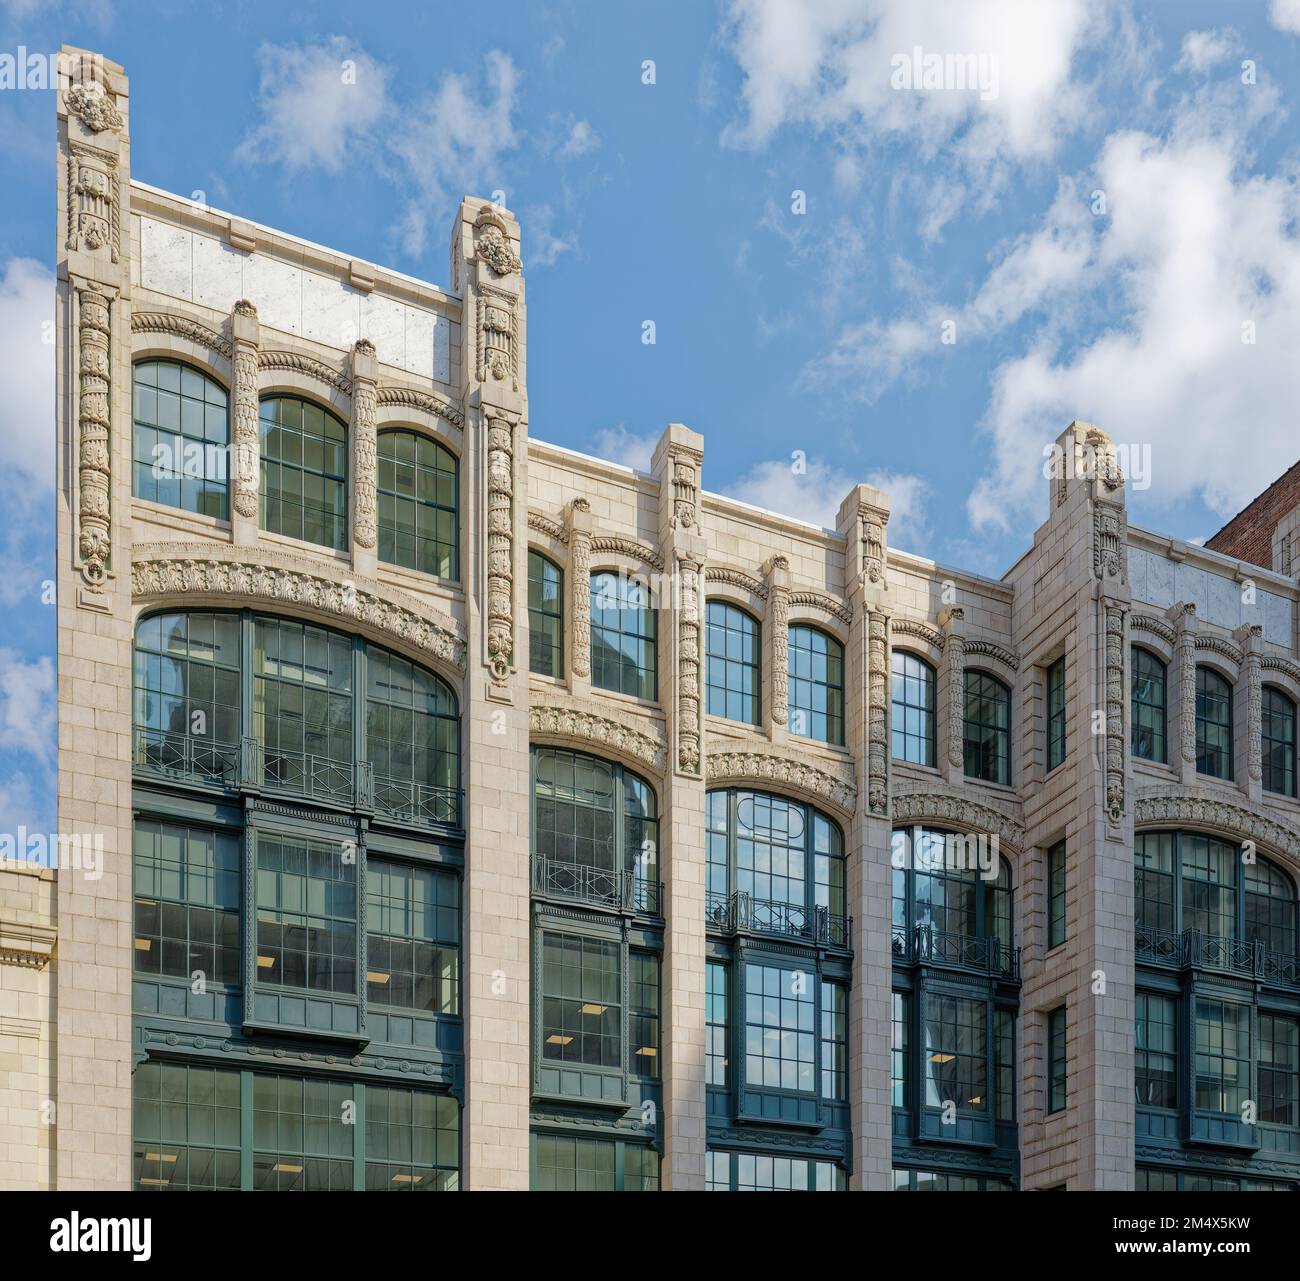 United Way of Greater Cleveland now occupies the Lindner Building, aka Mandel Building. Built in 1915 as a department store. Stock Photo